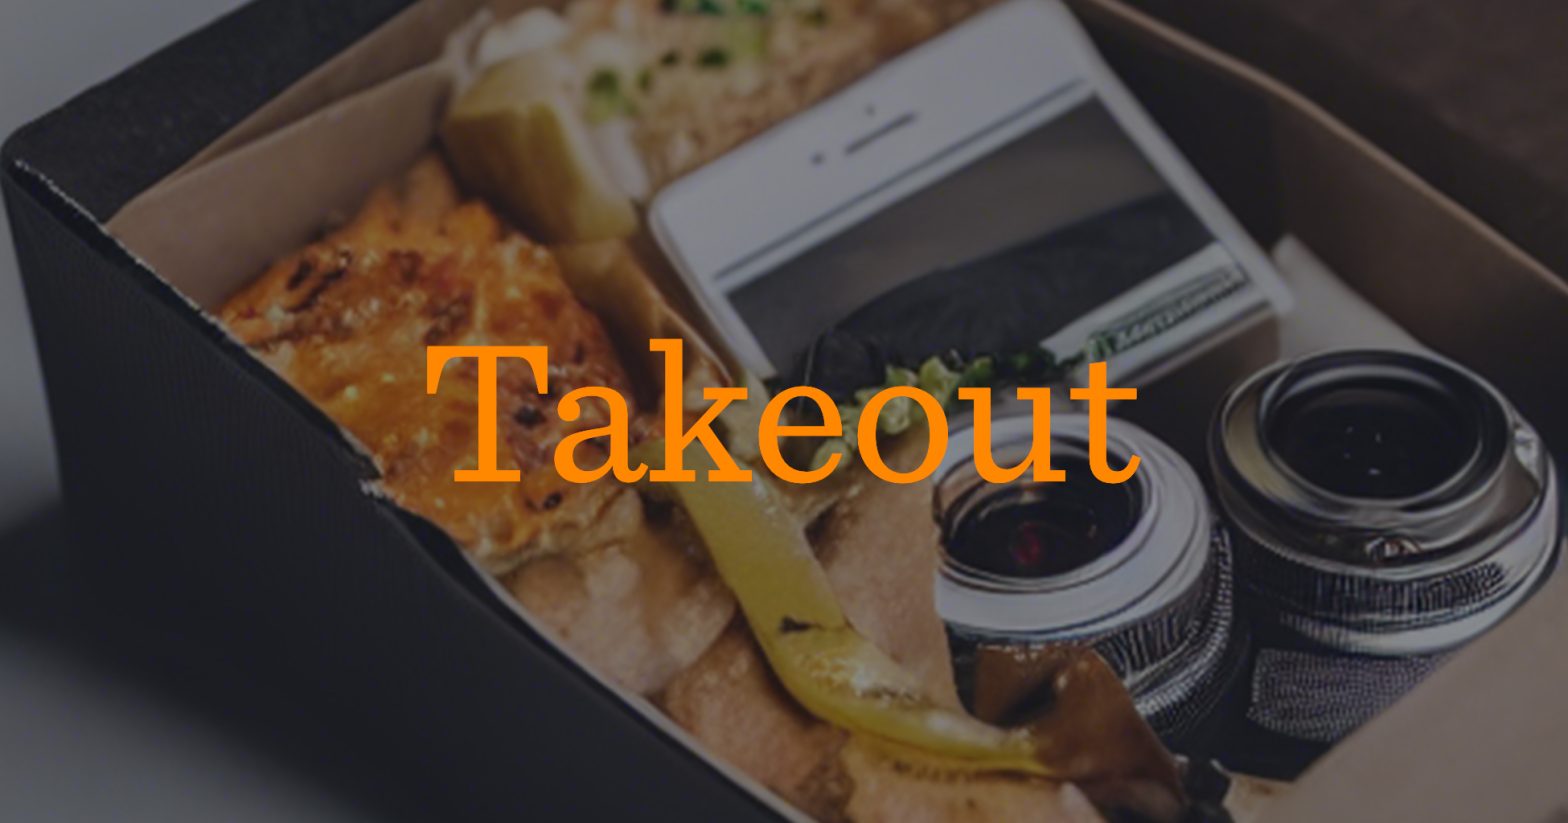 Image depicting takeout food and lenses